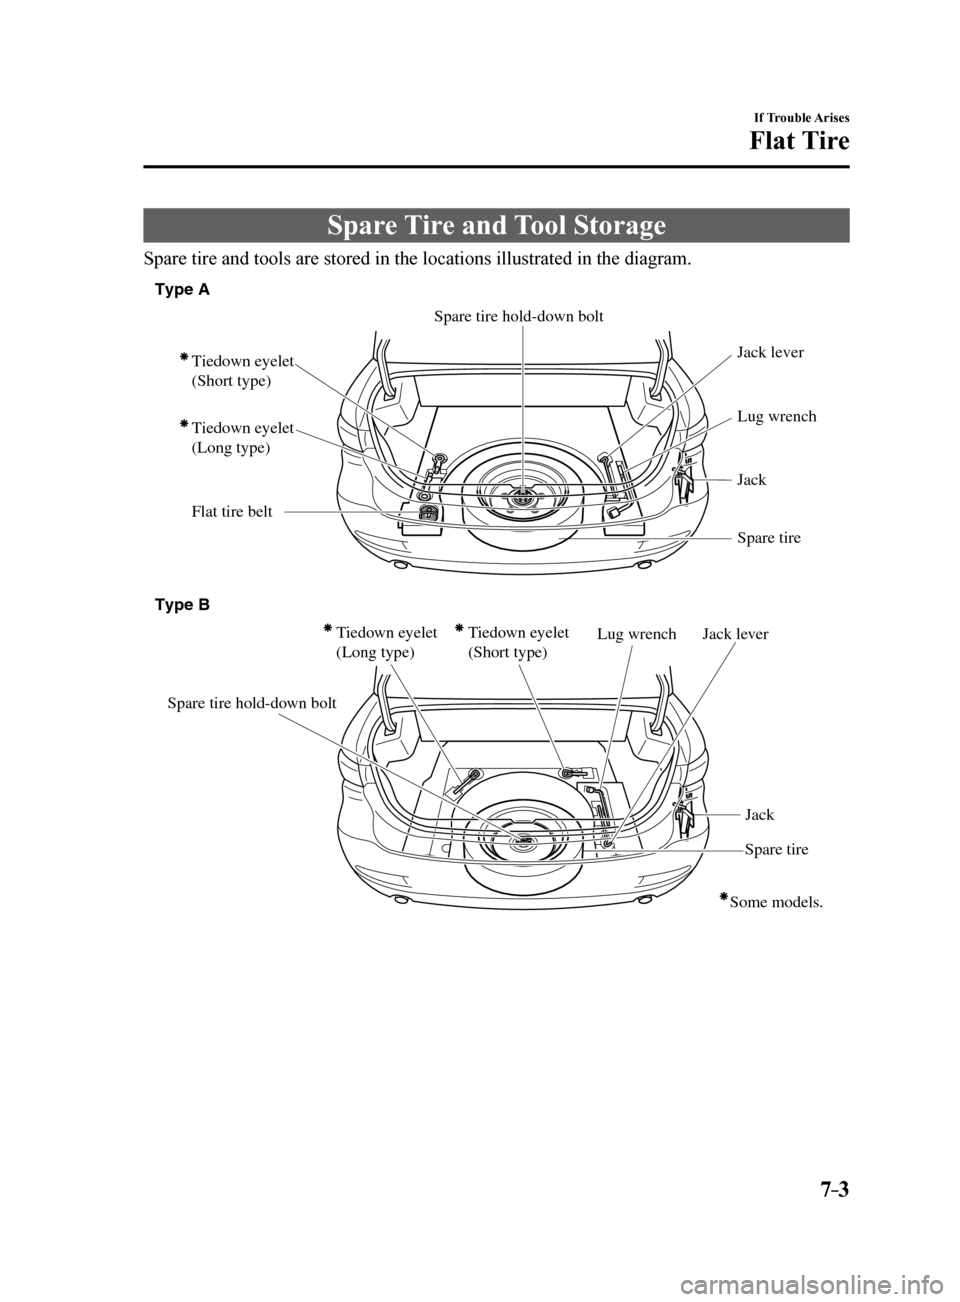 MAZDA MODEL 6 2017  Owners Manual (in English) 7–3
If Trouble Arises
Flat Tire
Spare Tire and Tool Storage
Spare tire and tools are stored in the locations illustrated in the diag\
ram.
Tiedown eyelet 
(Long type) Tiedown eyelet 
(Short type)
Fl